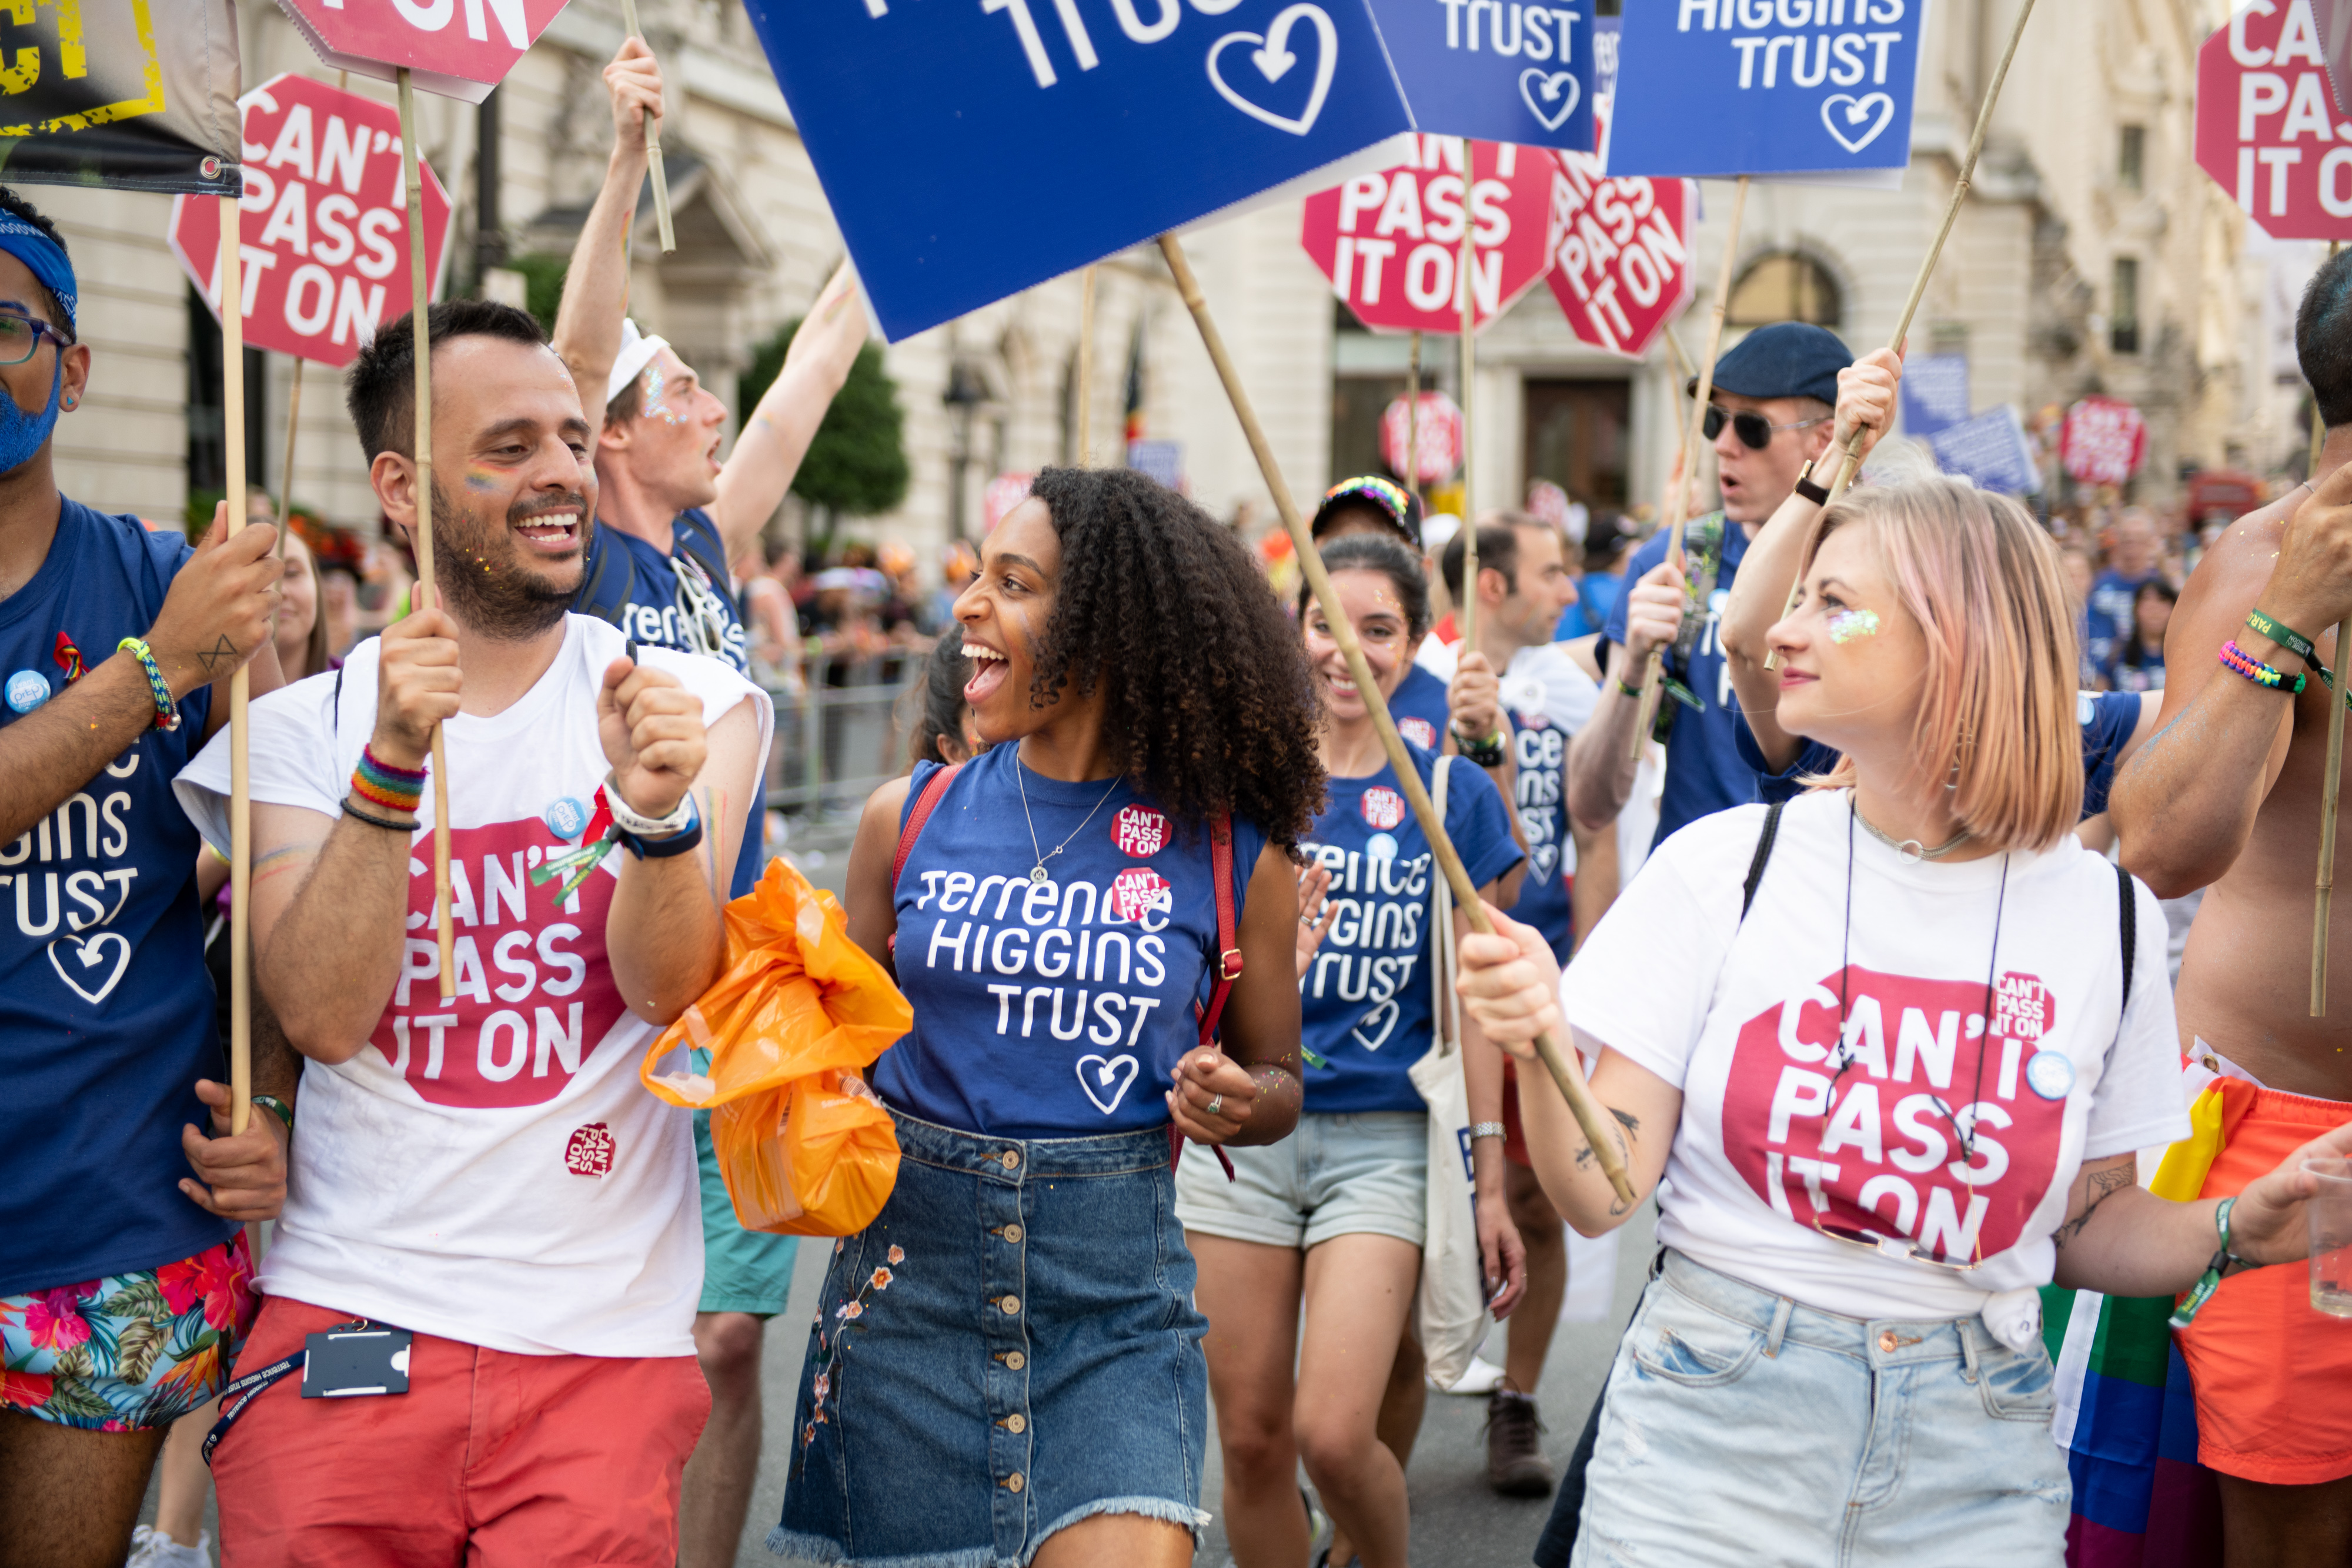 Marchers for Terrence Higgins Trust